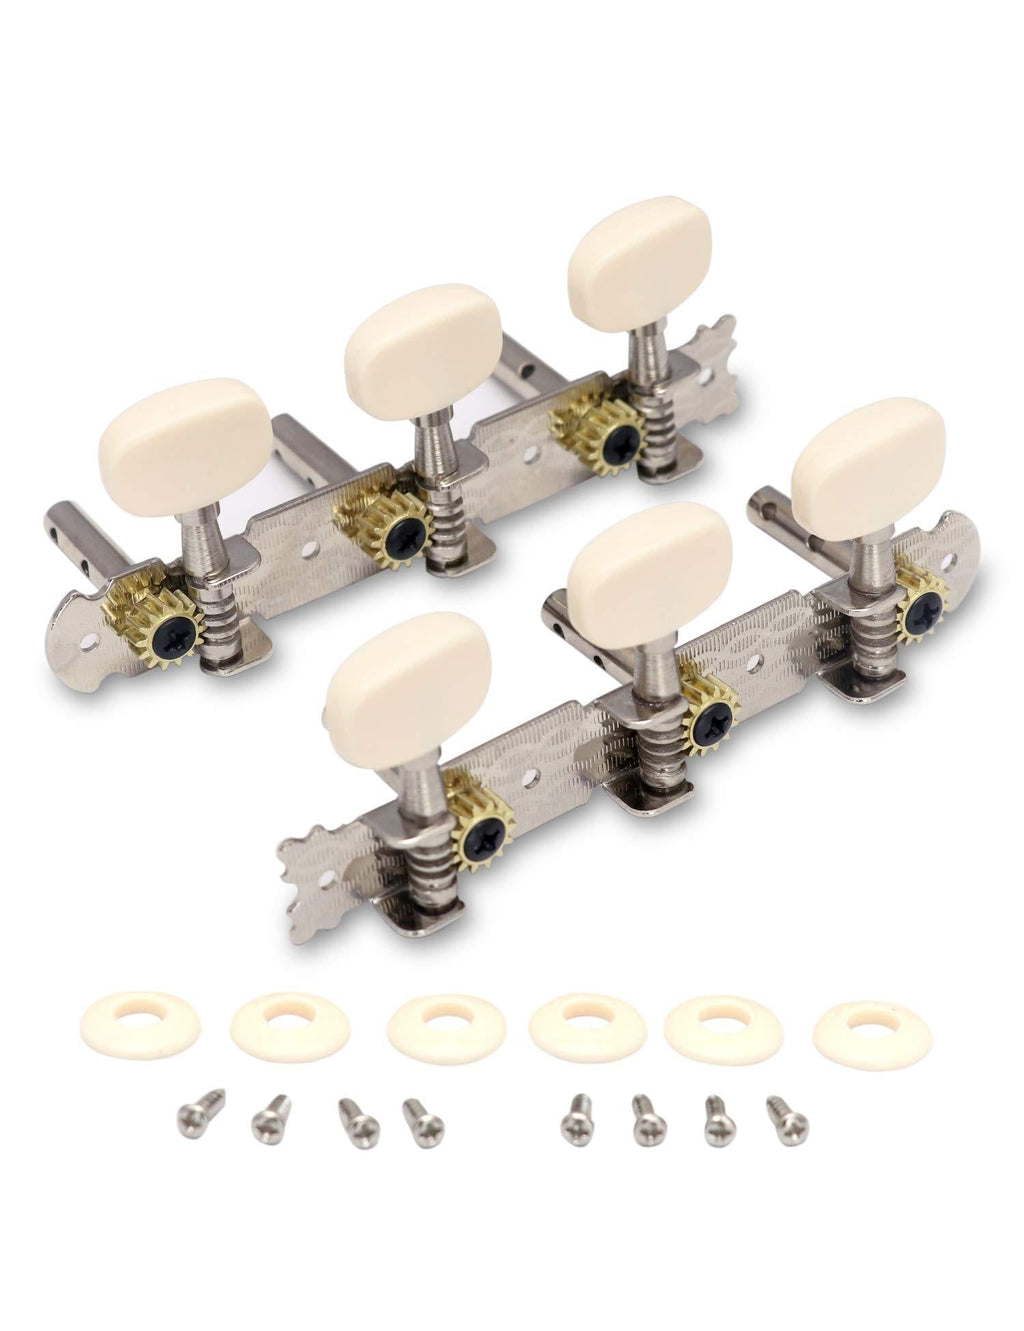 Metallor 3 on a Plank Guitar Tuning Pegs Gold Plated Machine Heads Tuning Keys Tuners Single Hole for Classical Guitar 3L 3R. (G326) G326